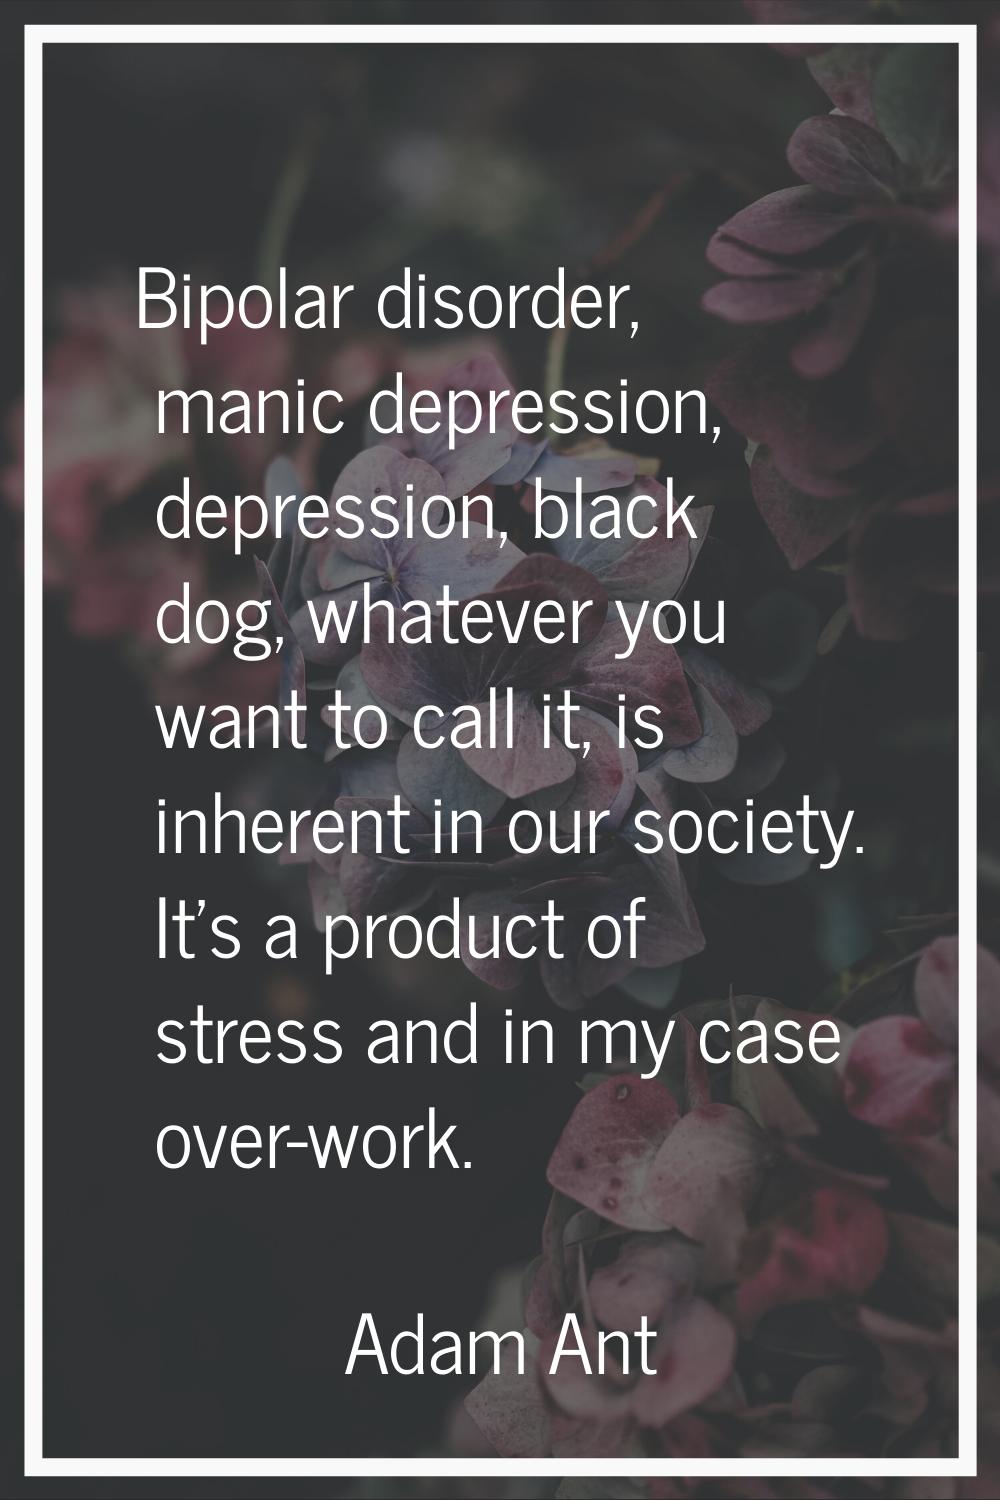 Bipolar disorder, manic depression, depression, black dog, whatever you want to call it, is inheren